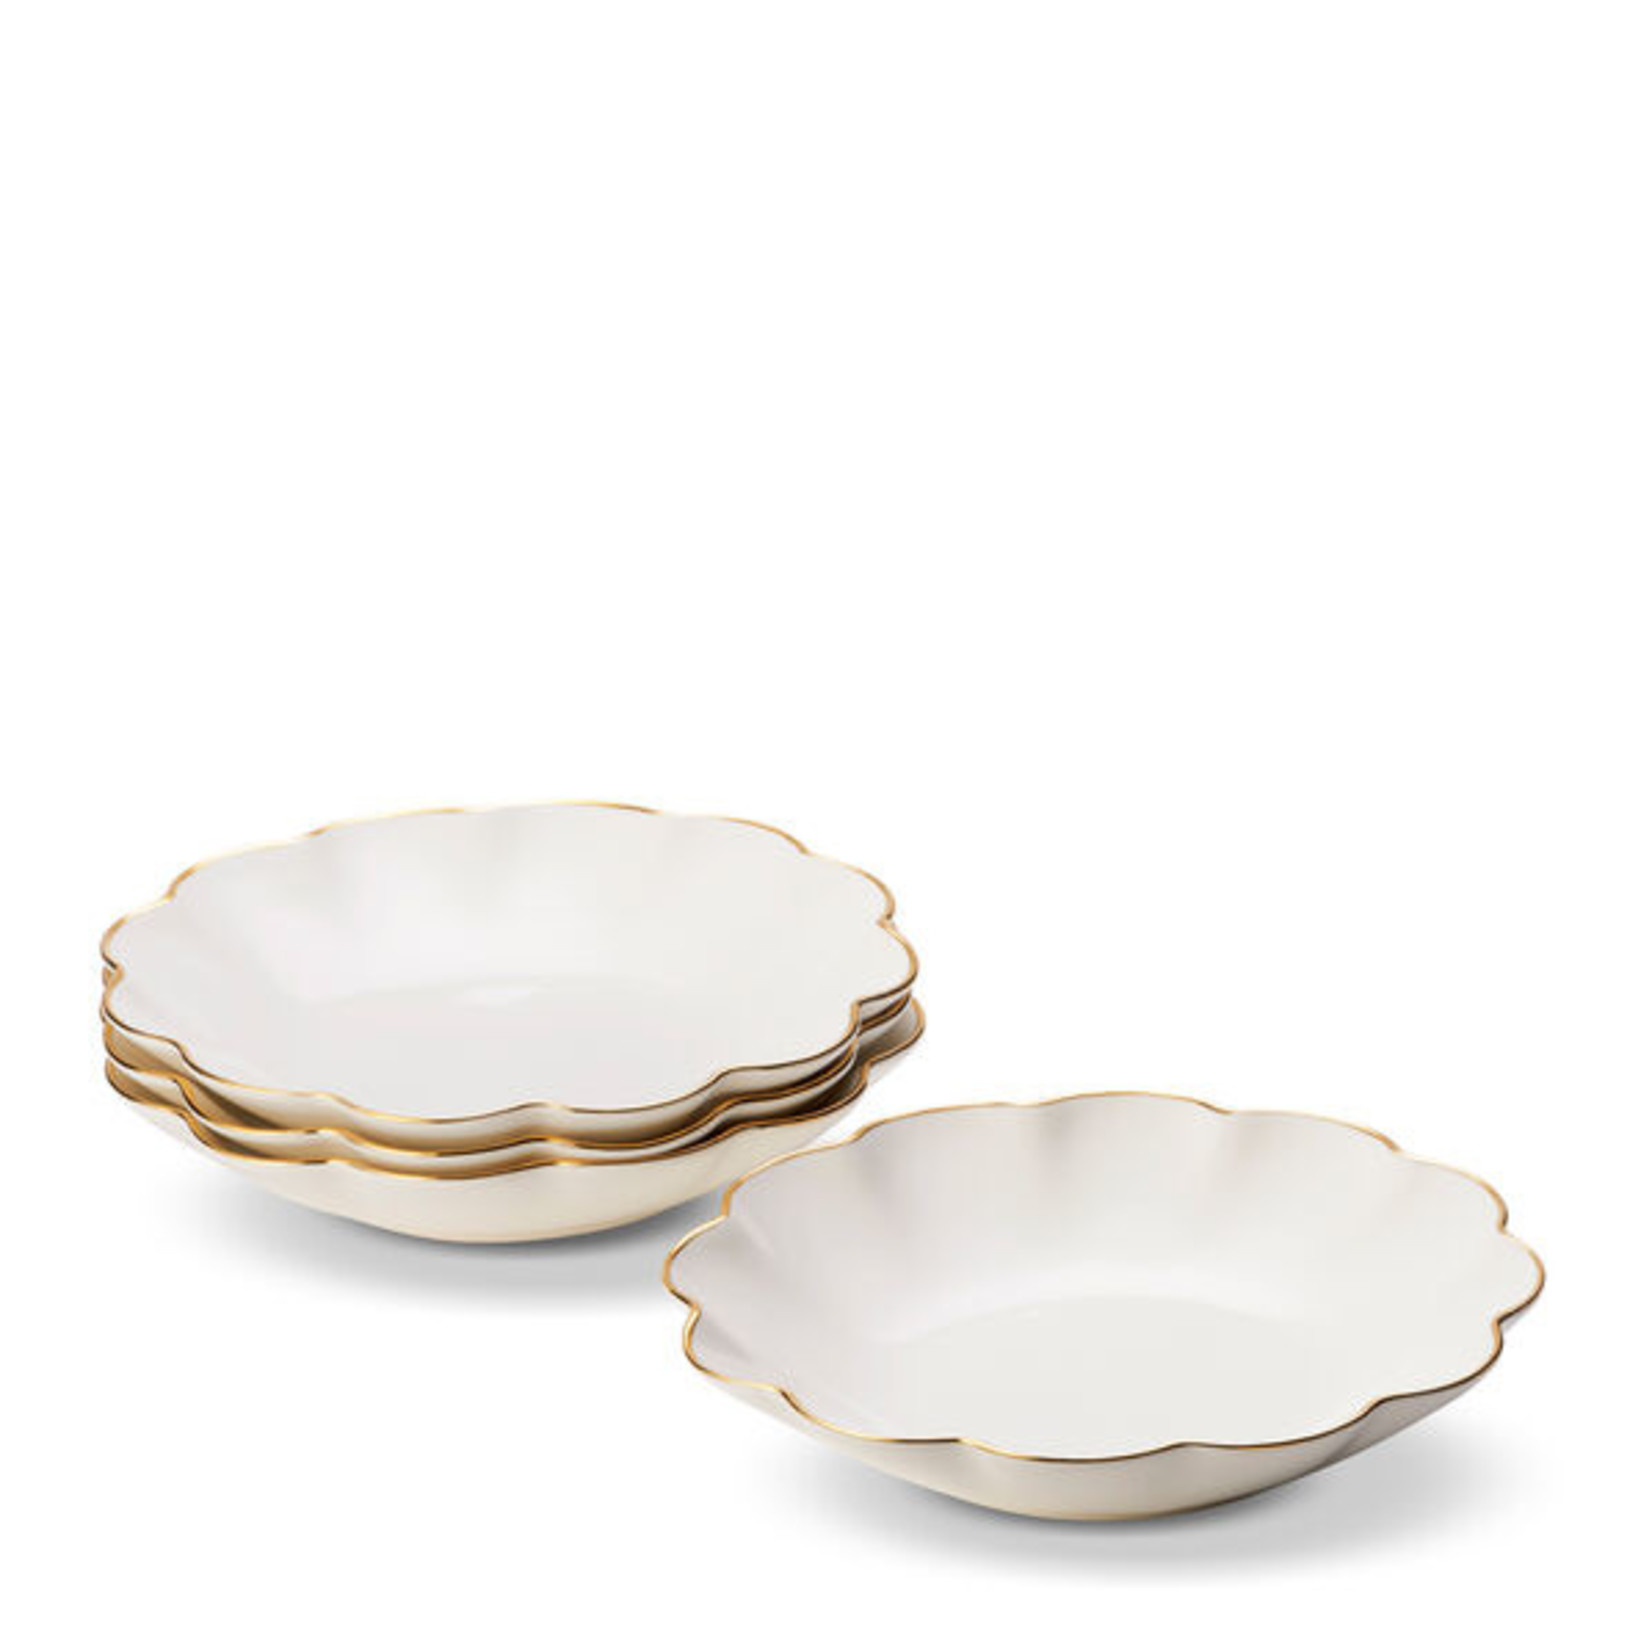 Aerin Scalloped Appetizer Plates, Set of 4